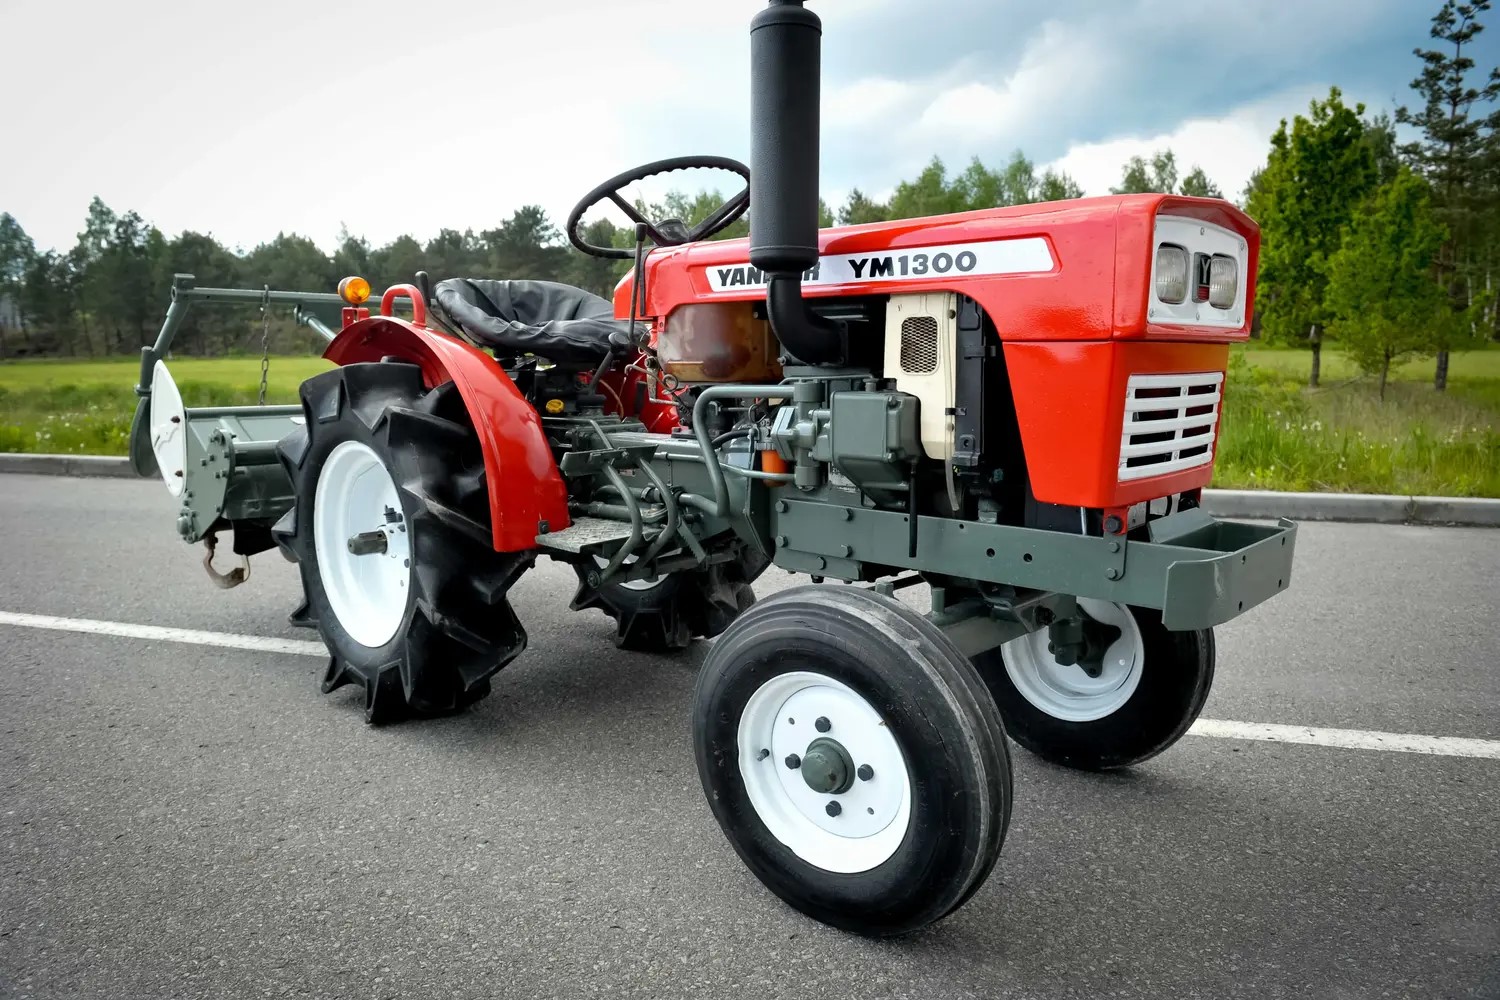 Yanmar YM1300 2x4 13KM with an original Japanese tiller, another classic from our company